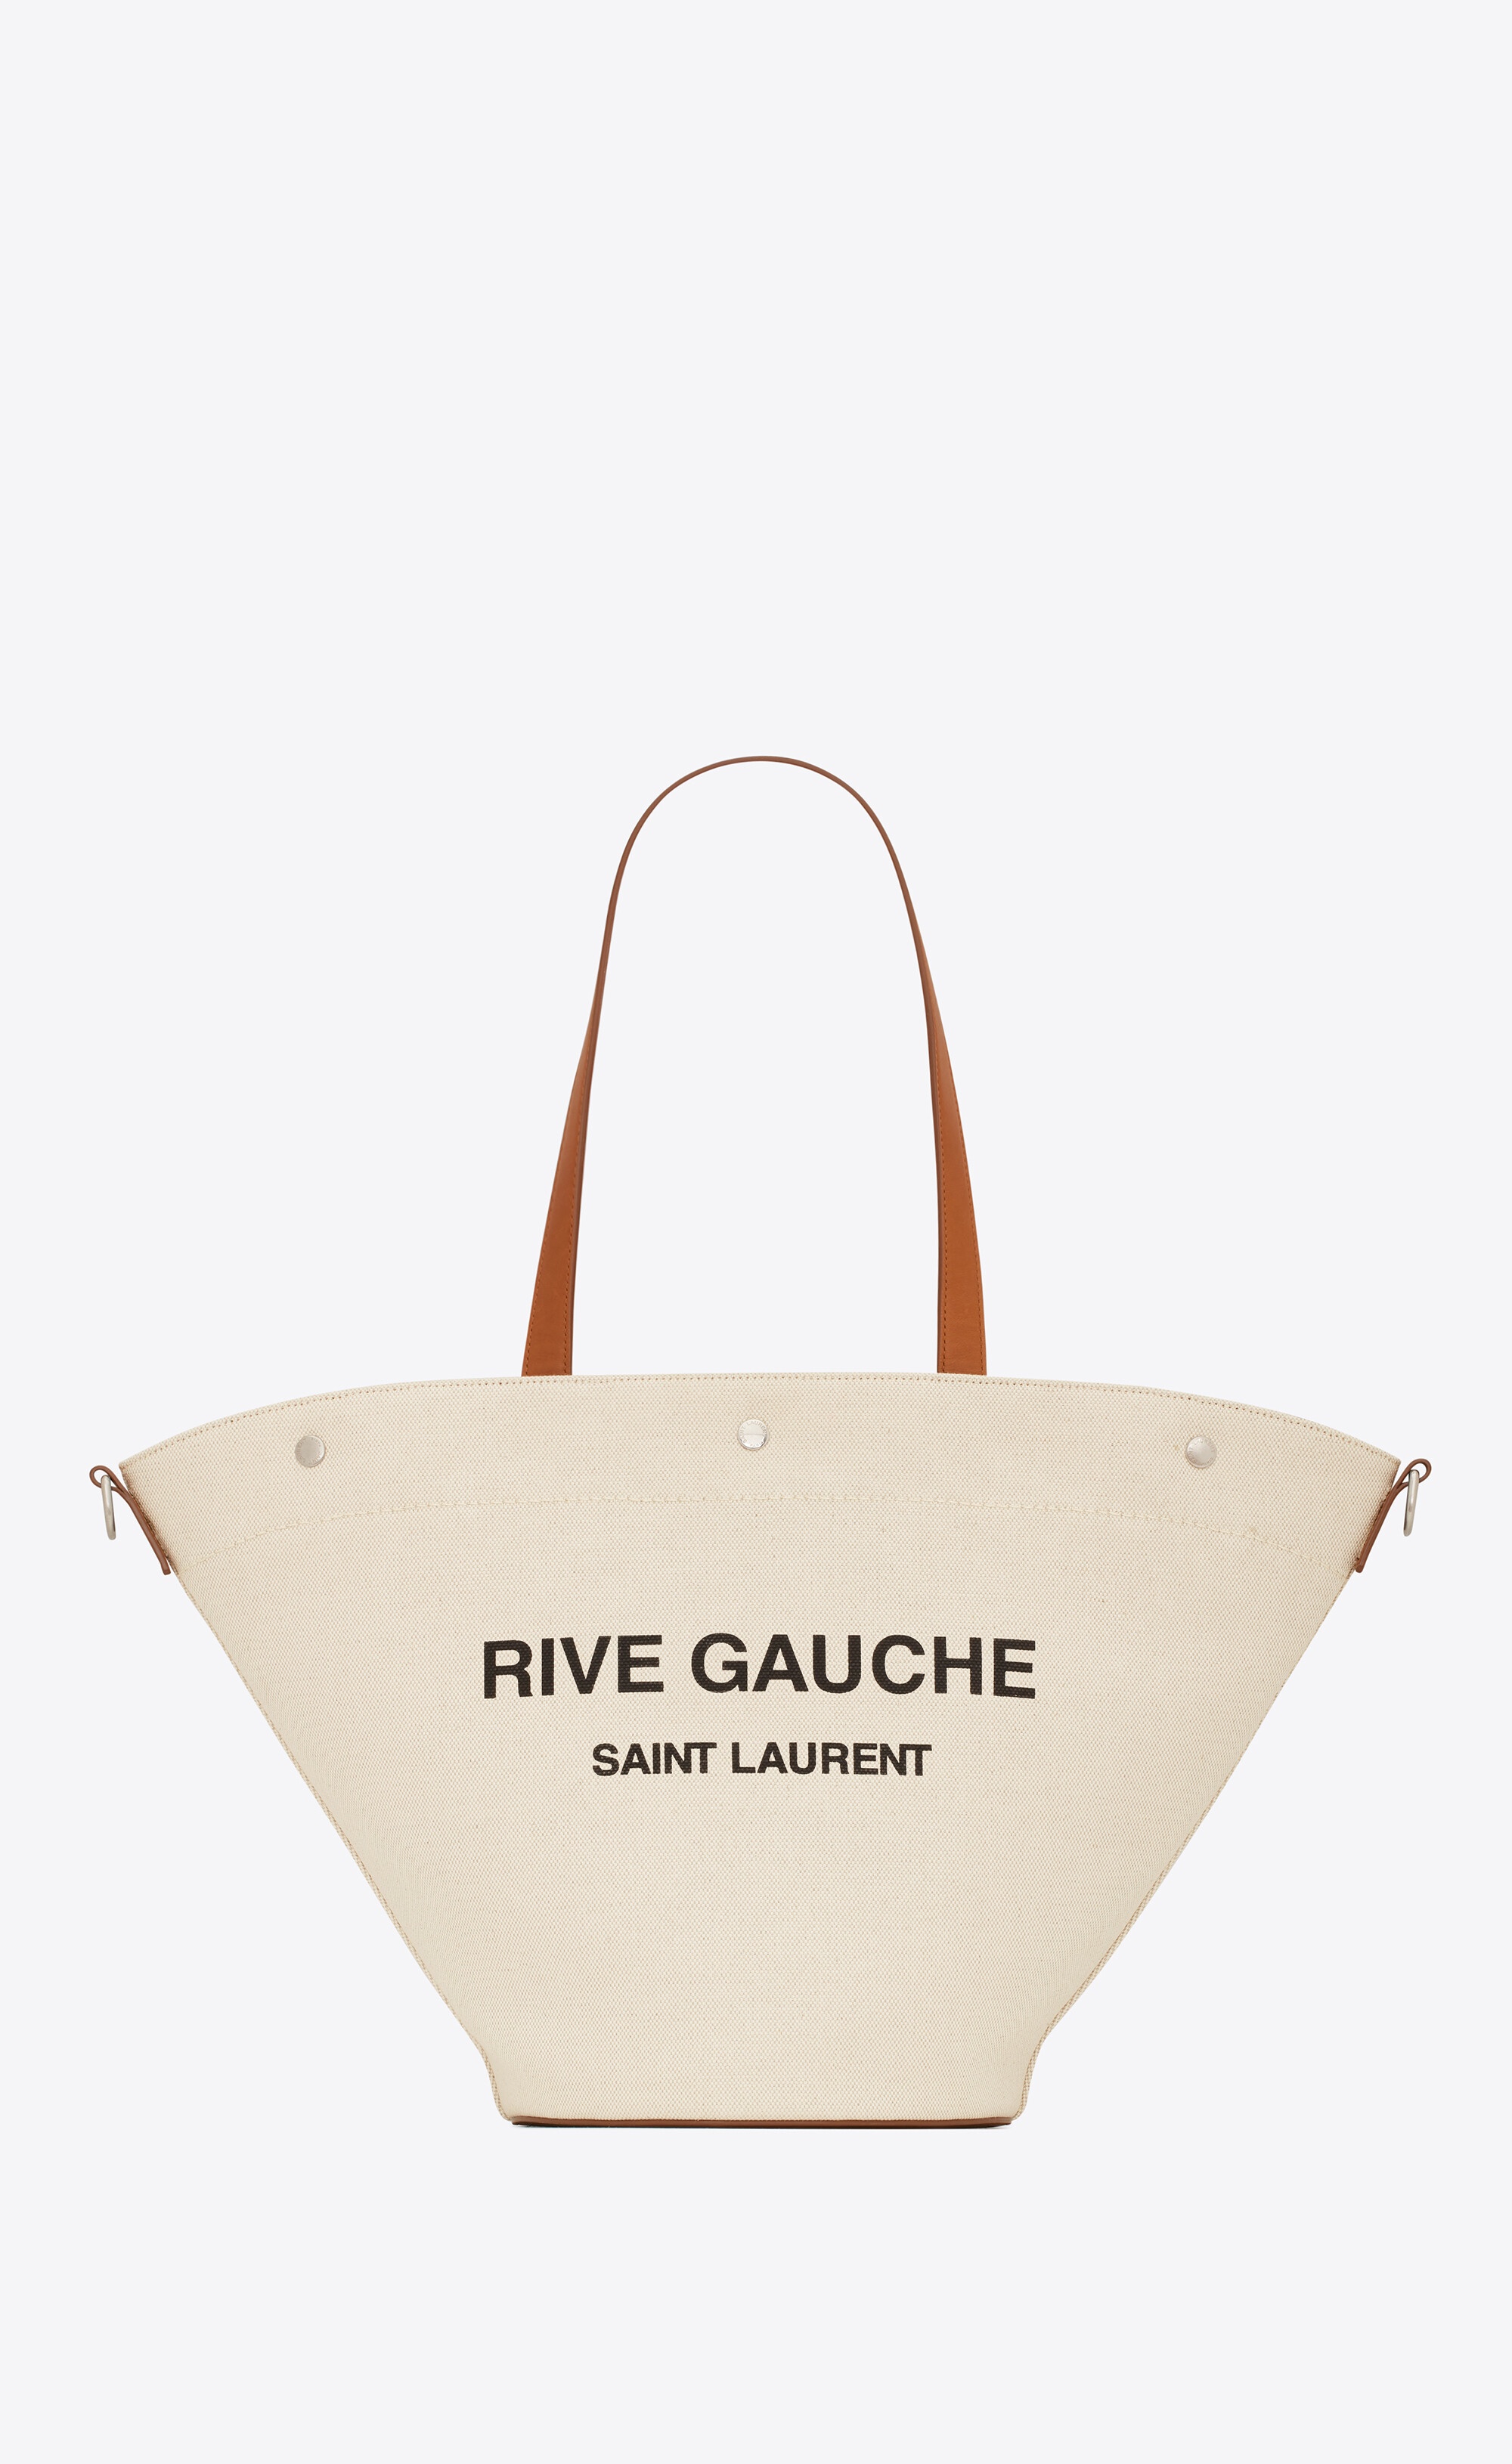 rive gauche tote bag in canvas and vintage leather - 1